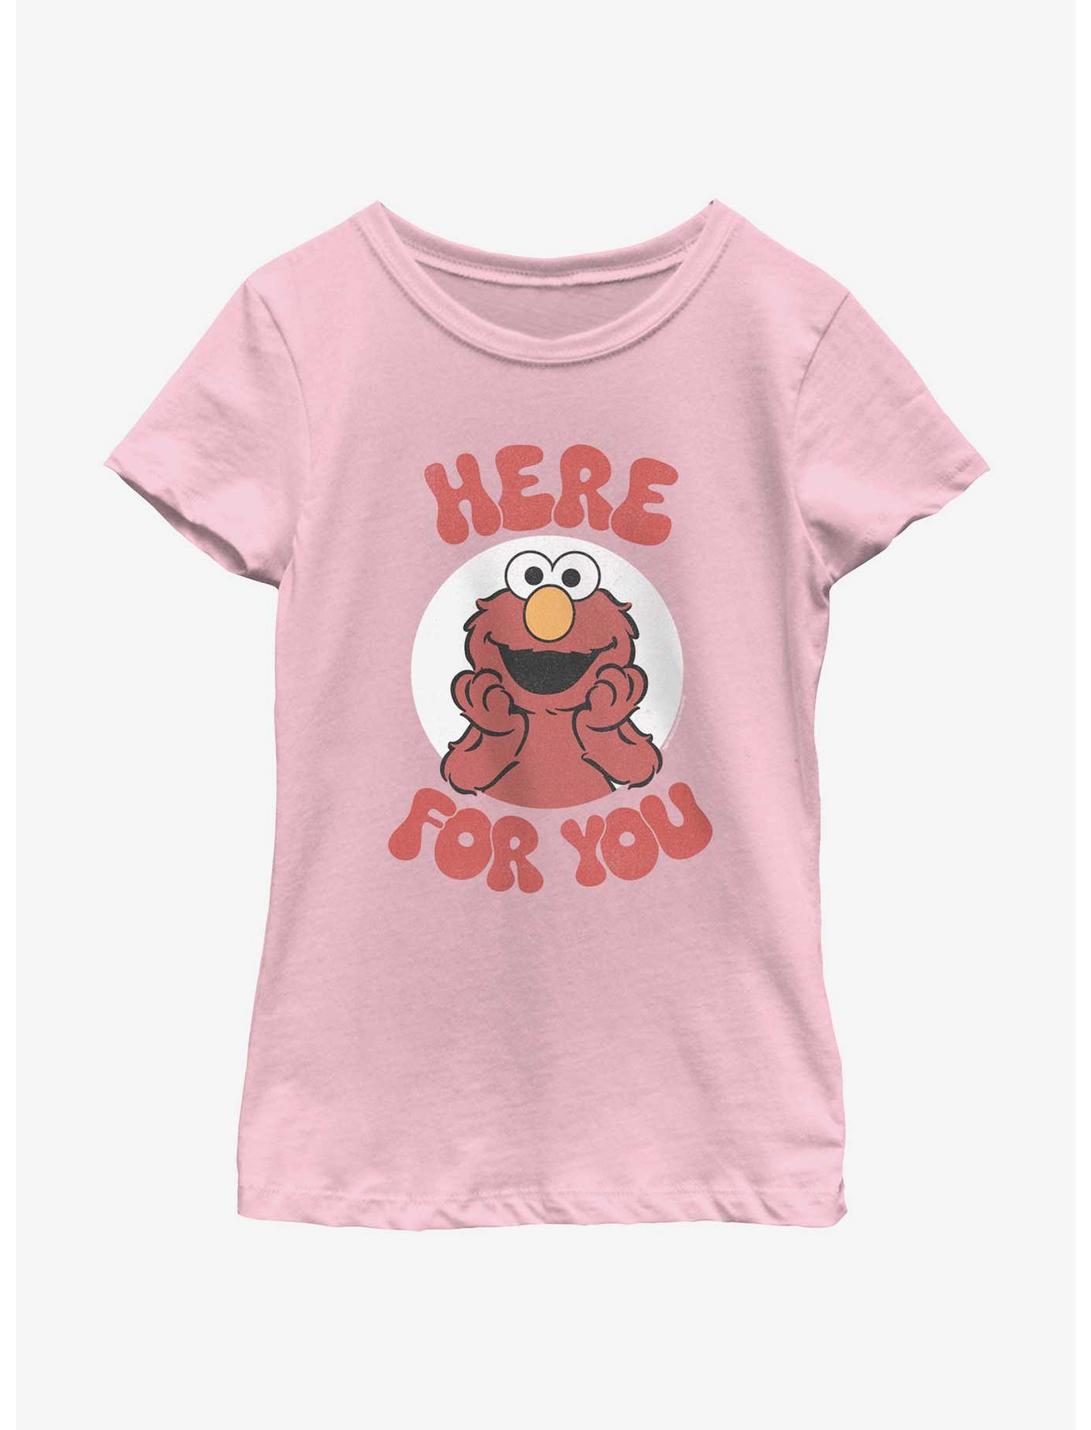 Sesame Street Elmo Here For You Youth Girls T-Shirt, PINK, hi-res